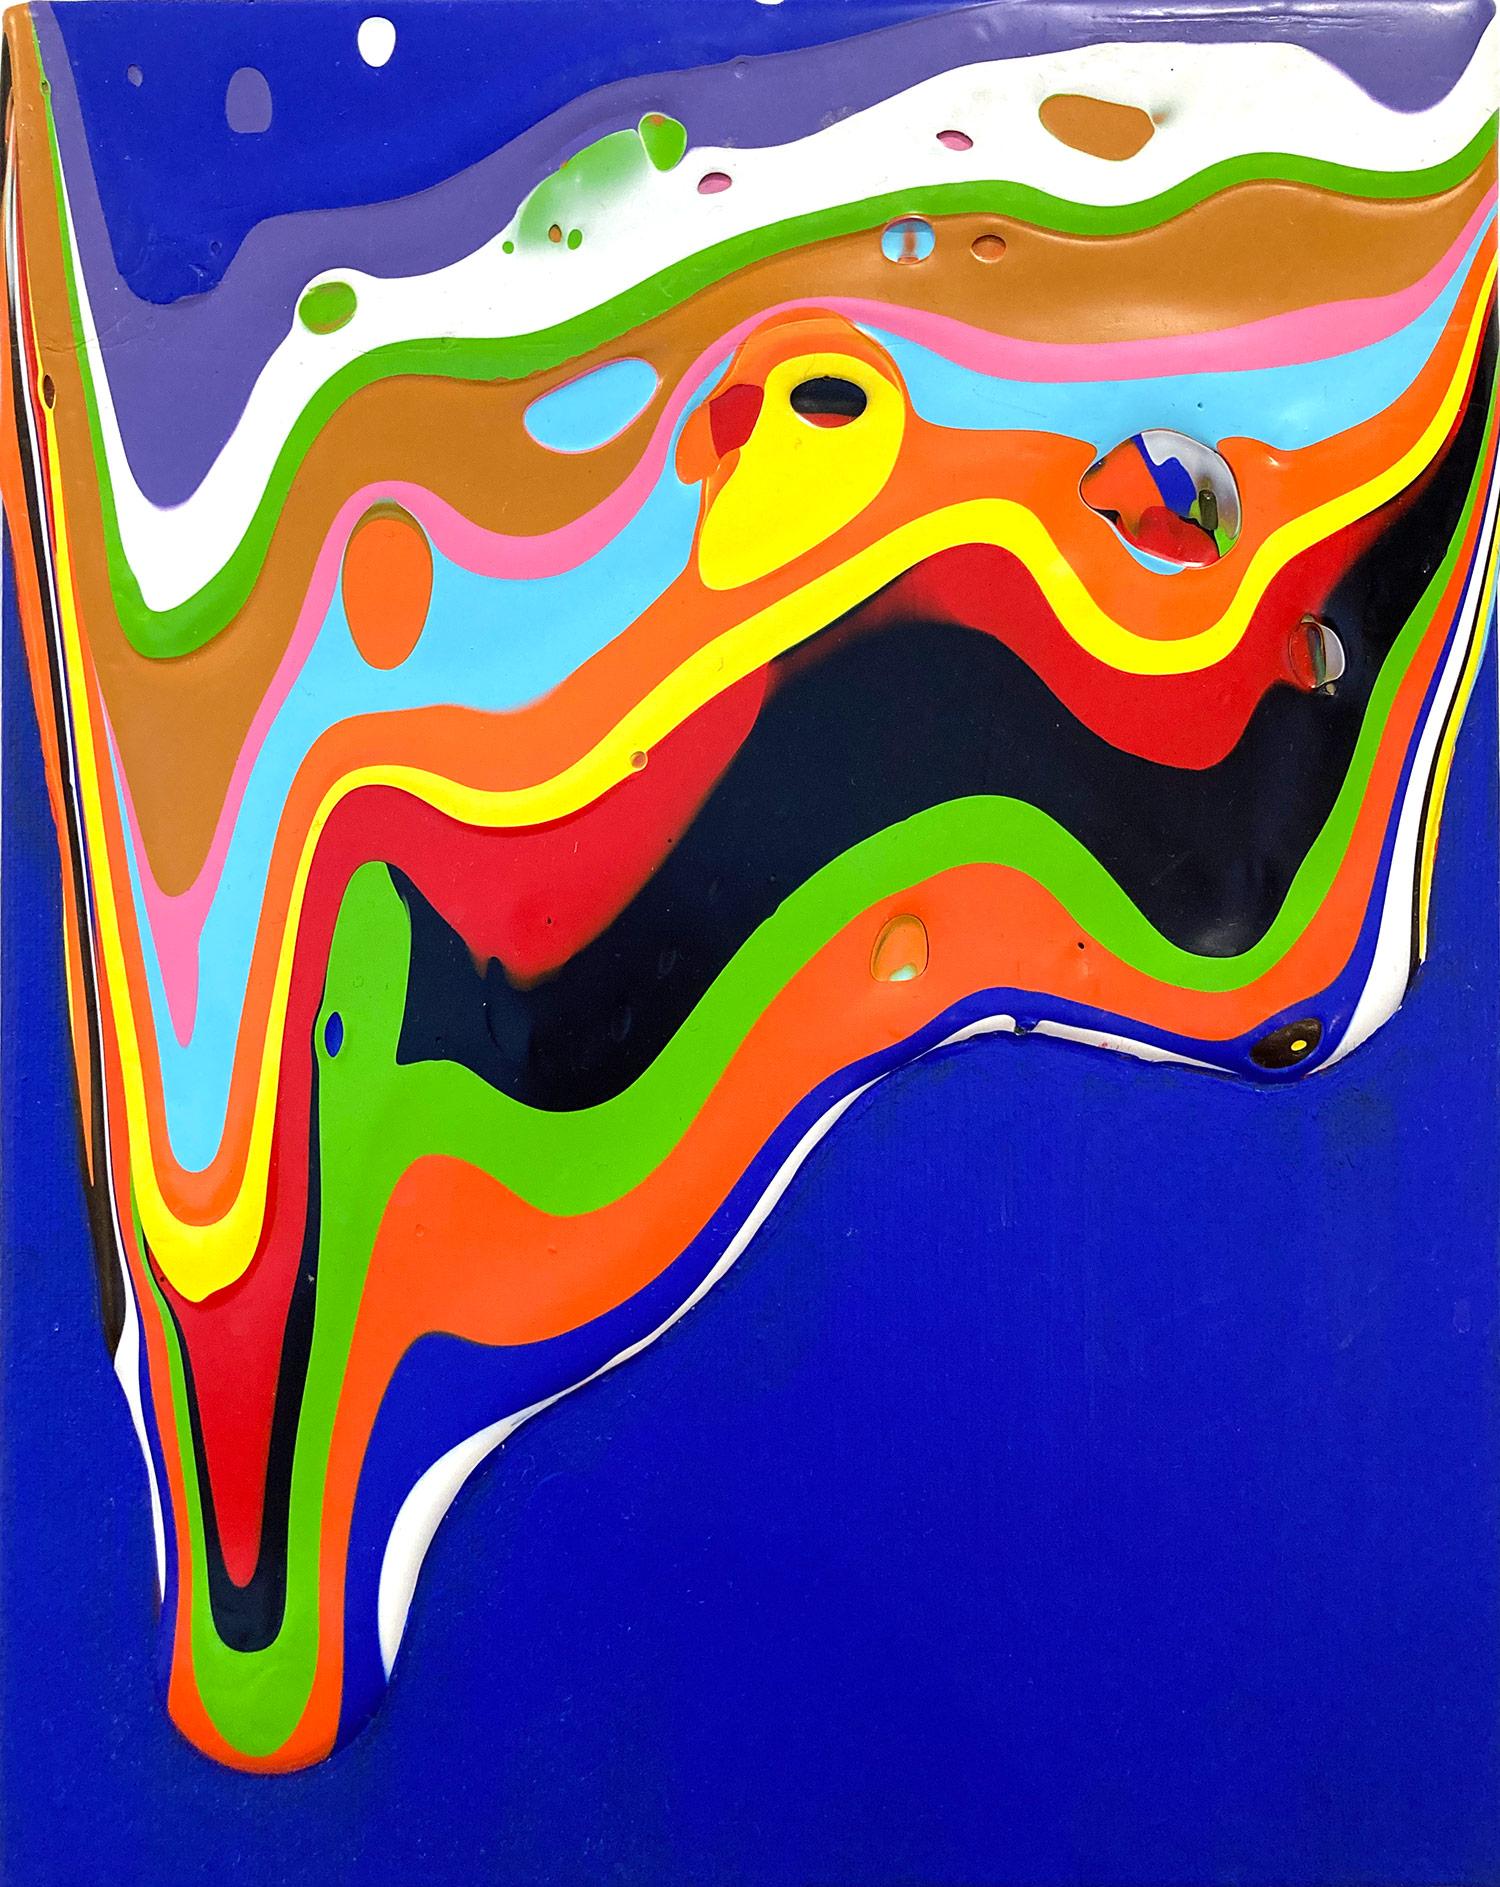 Derick Smith Abstract Painting - "Abundance 5" Mesmerizing Abstract Colorful Drip Acrylic Painting on Canvas